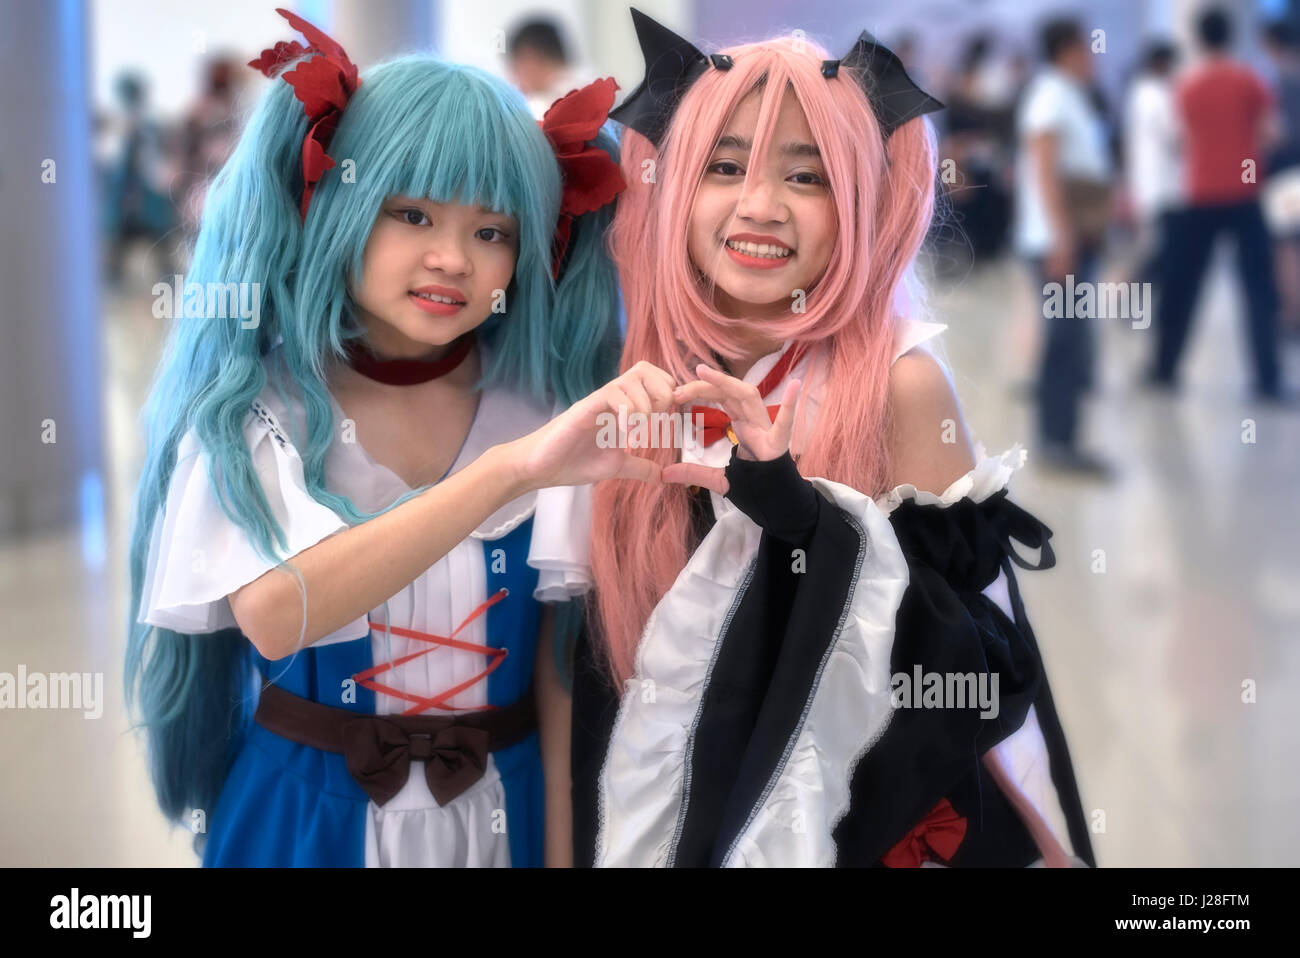 13 year old cosplayers